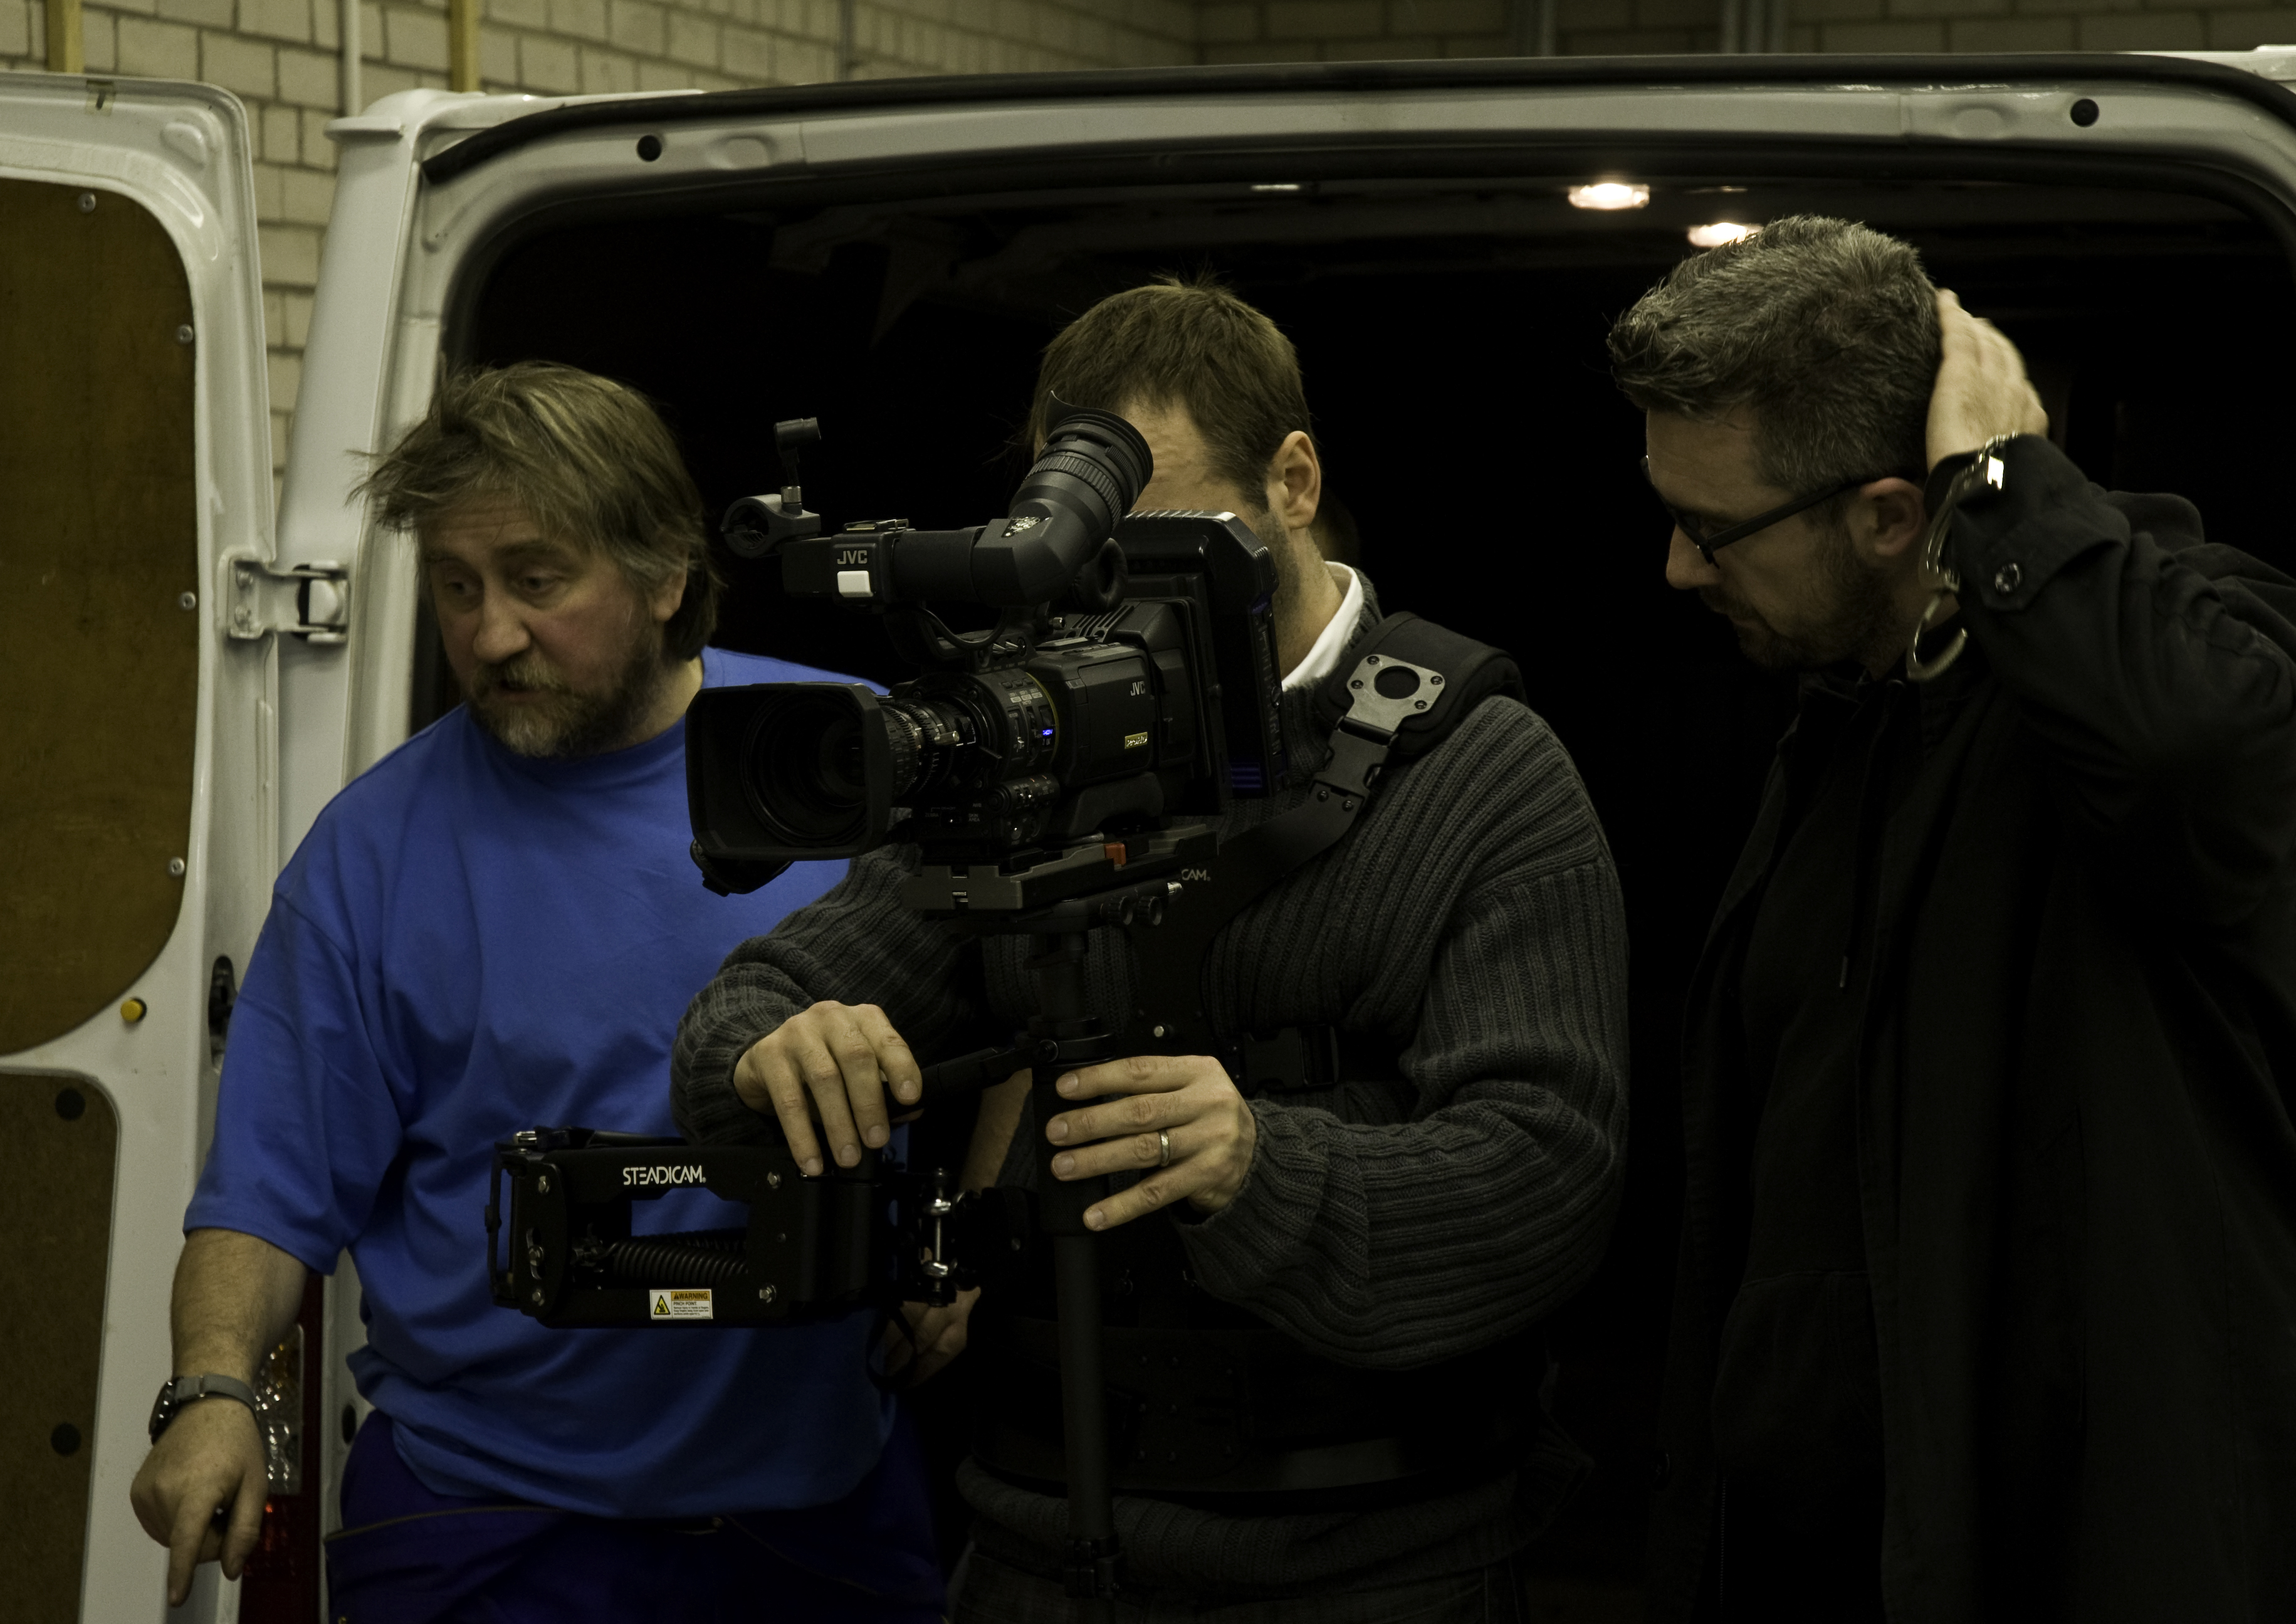 special effects supervisor, DOP and Steadicam Operator and Director Or hear no evil, see no evil speak no evil